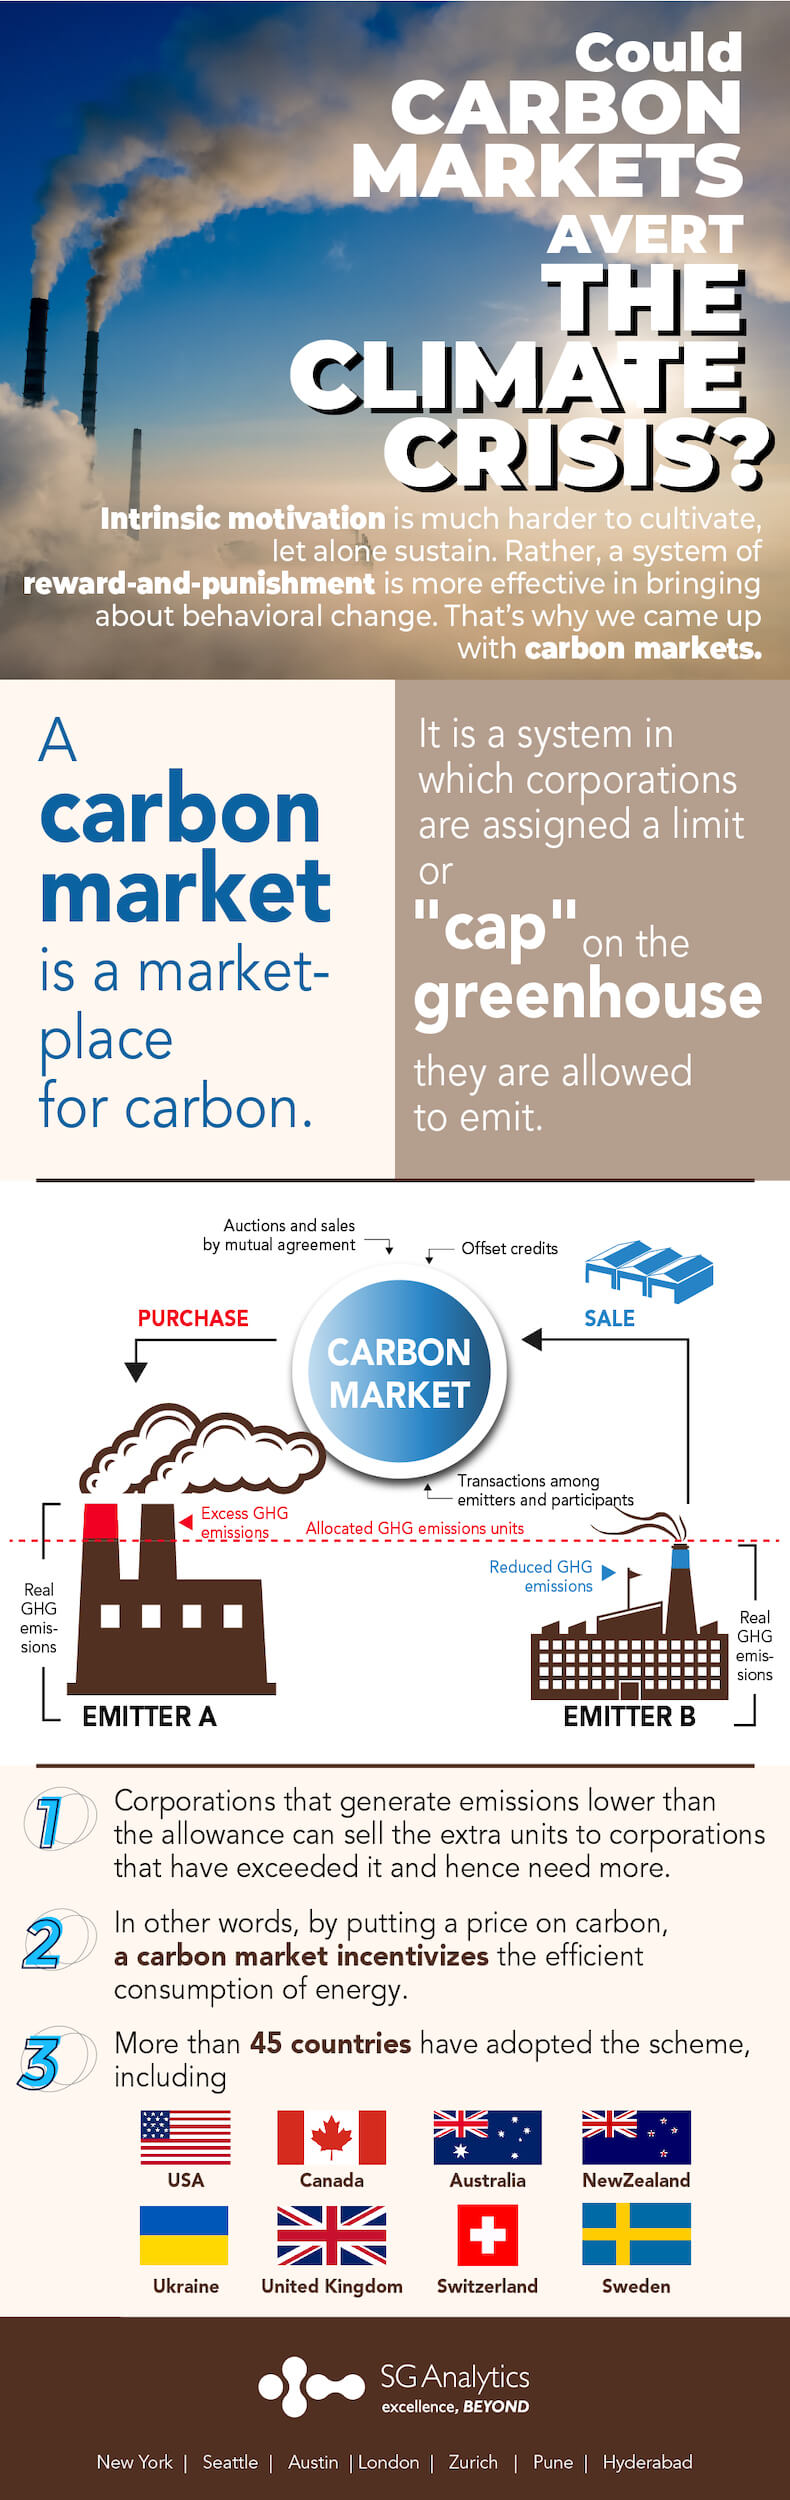 “Double the Emissions Reductions”: Could Carbon Markets Avert the Climate Crisis?